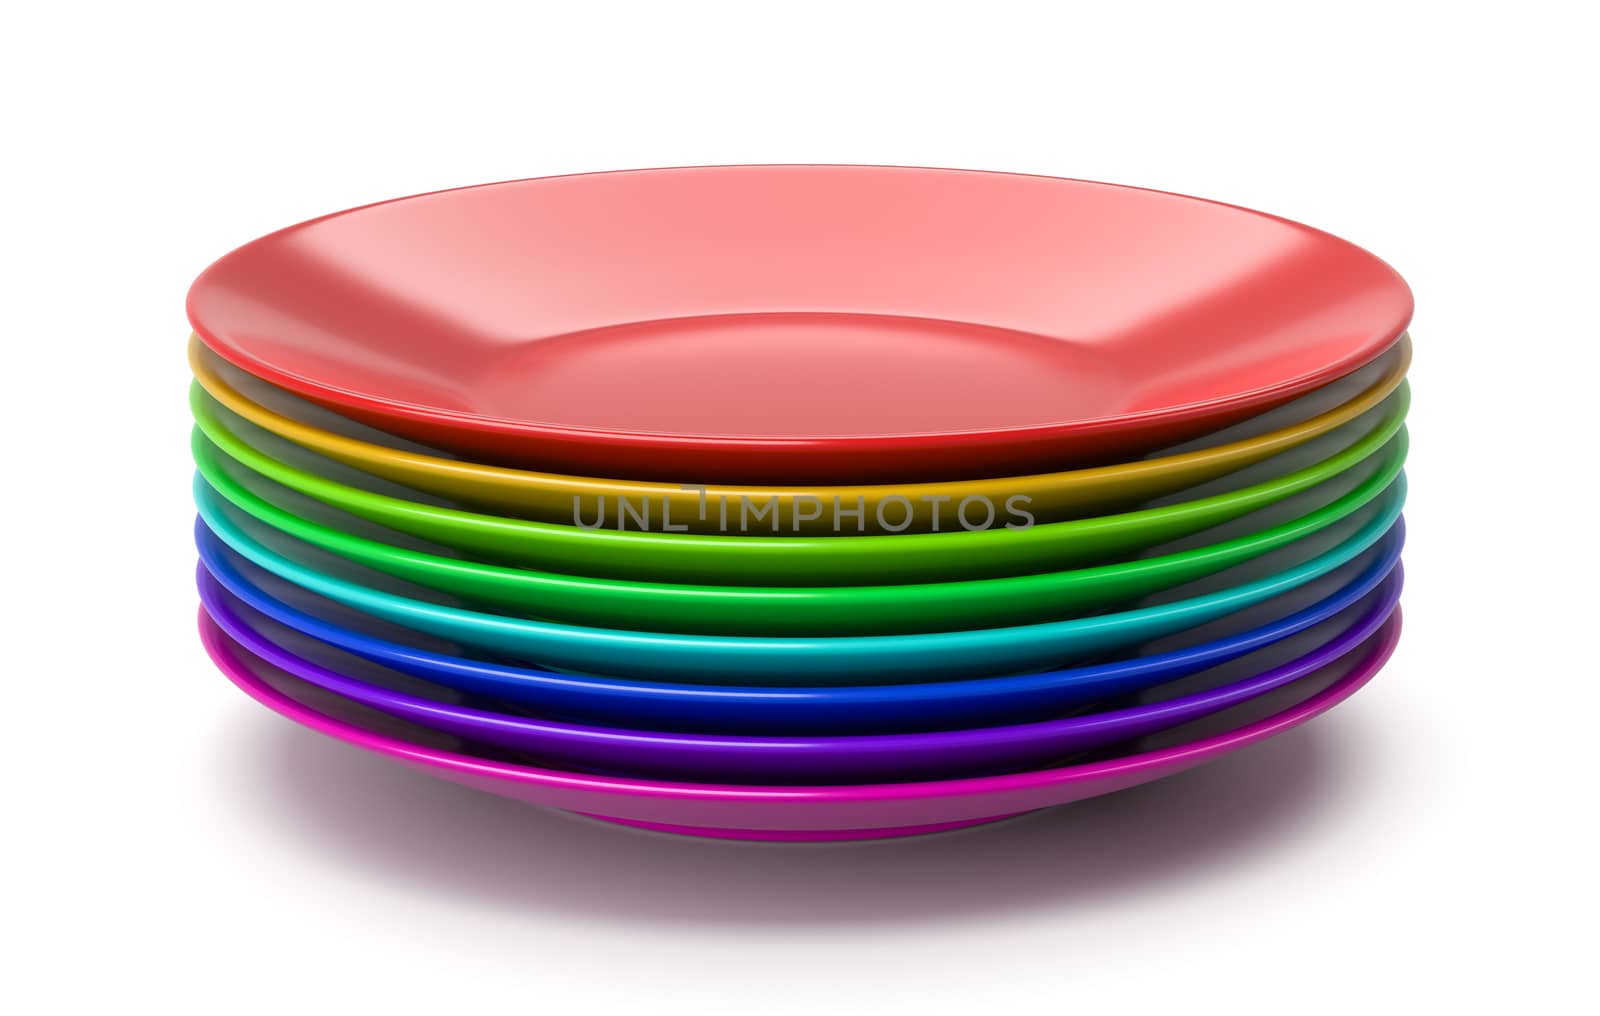 Stack of Colorful Dishes by make